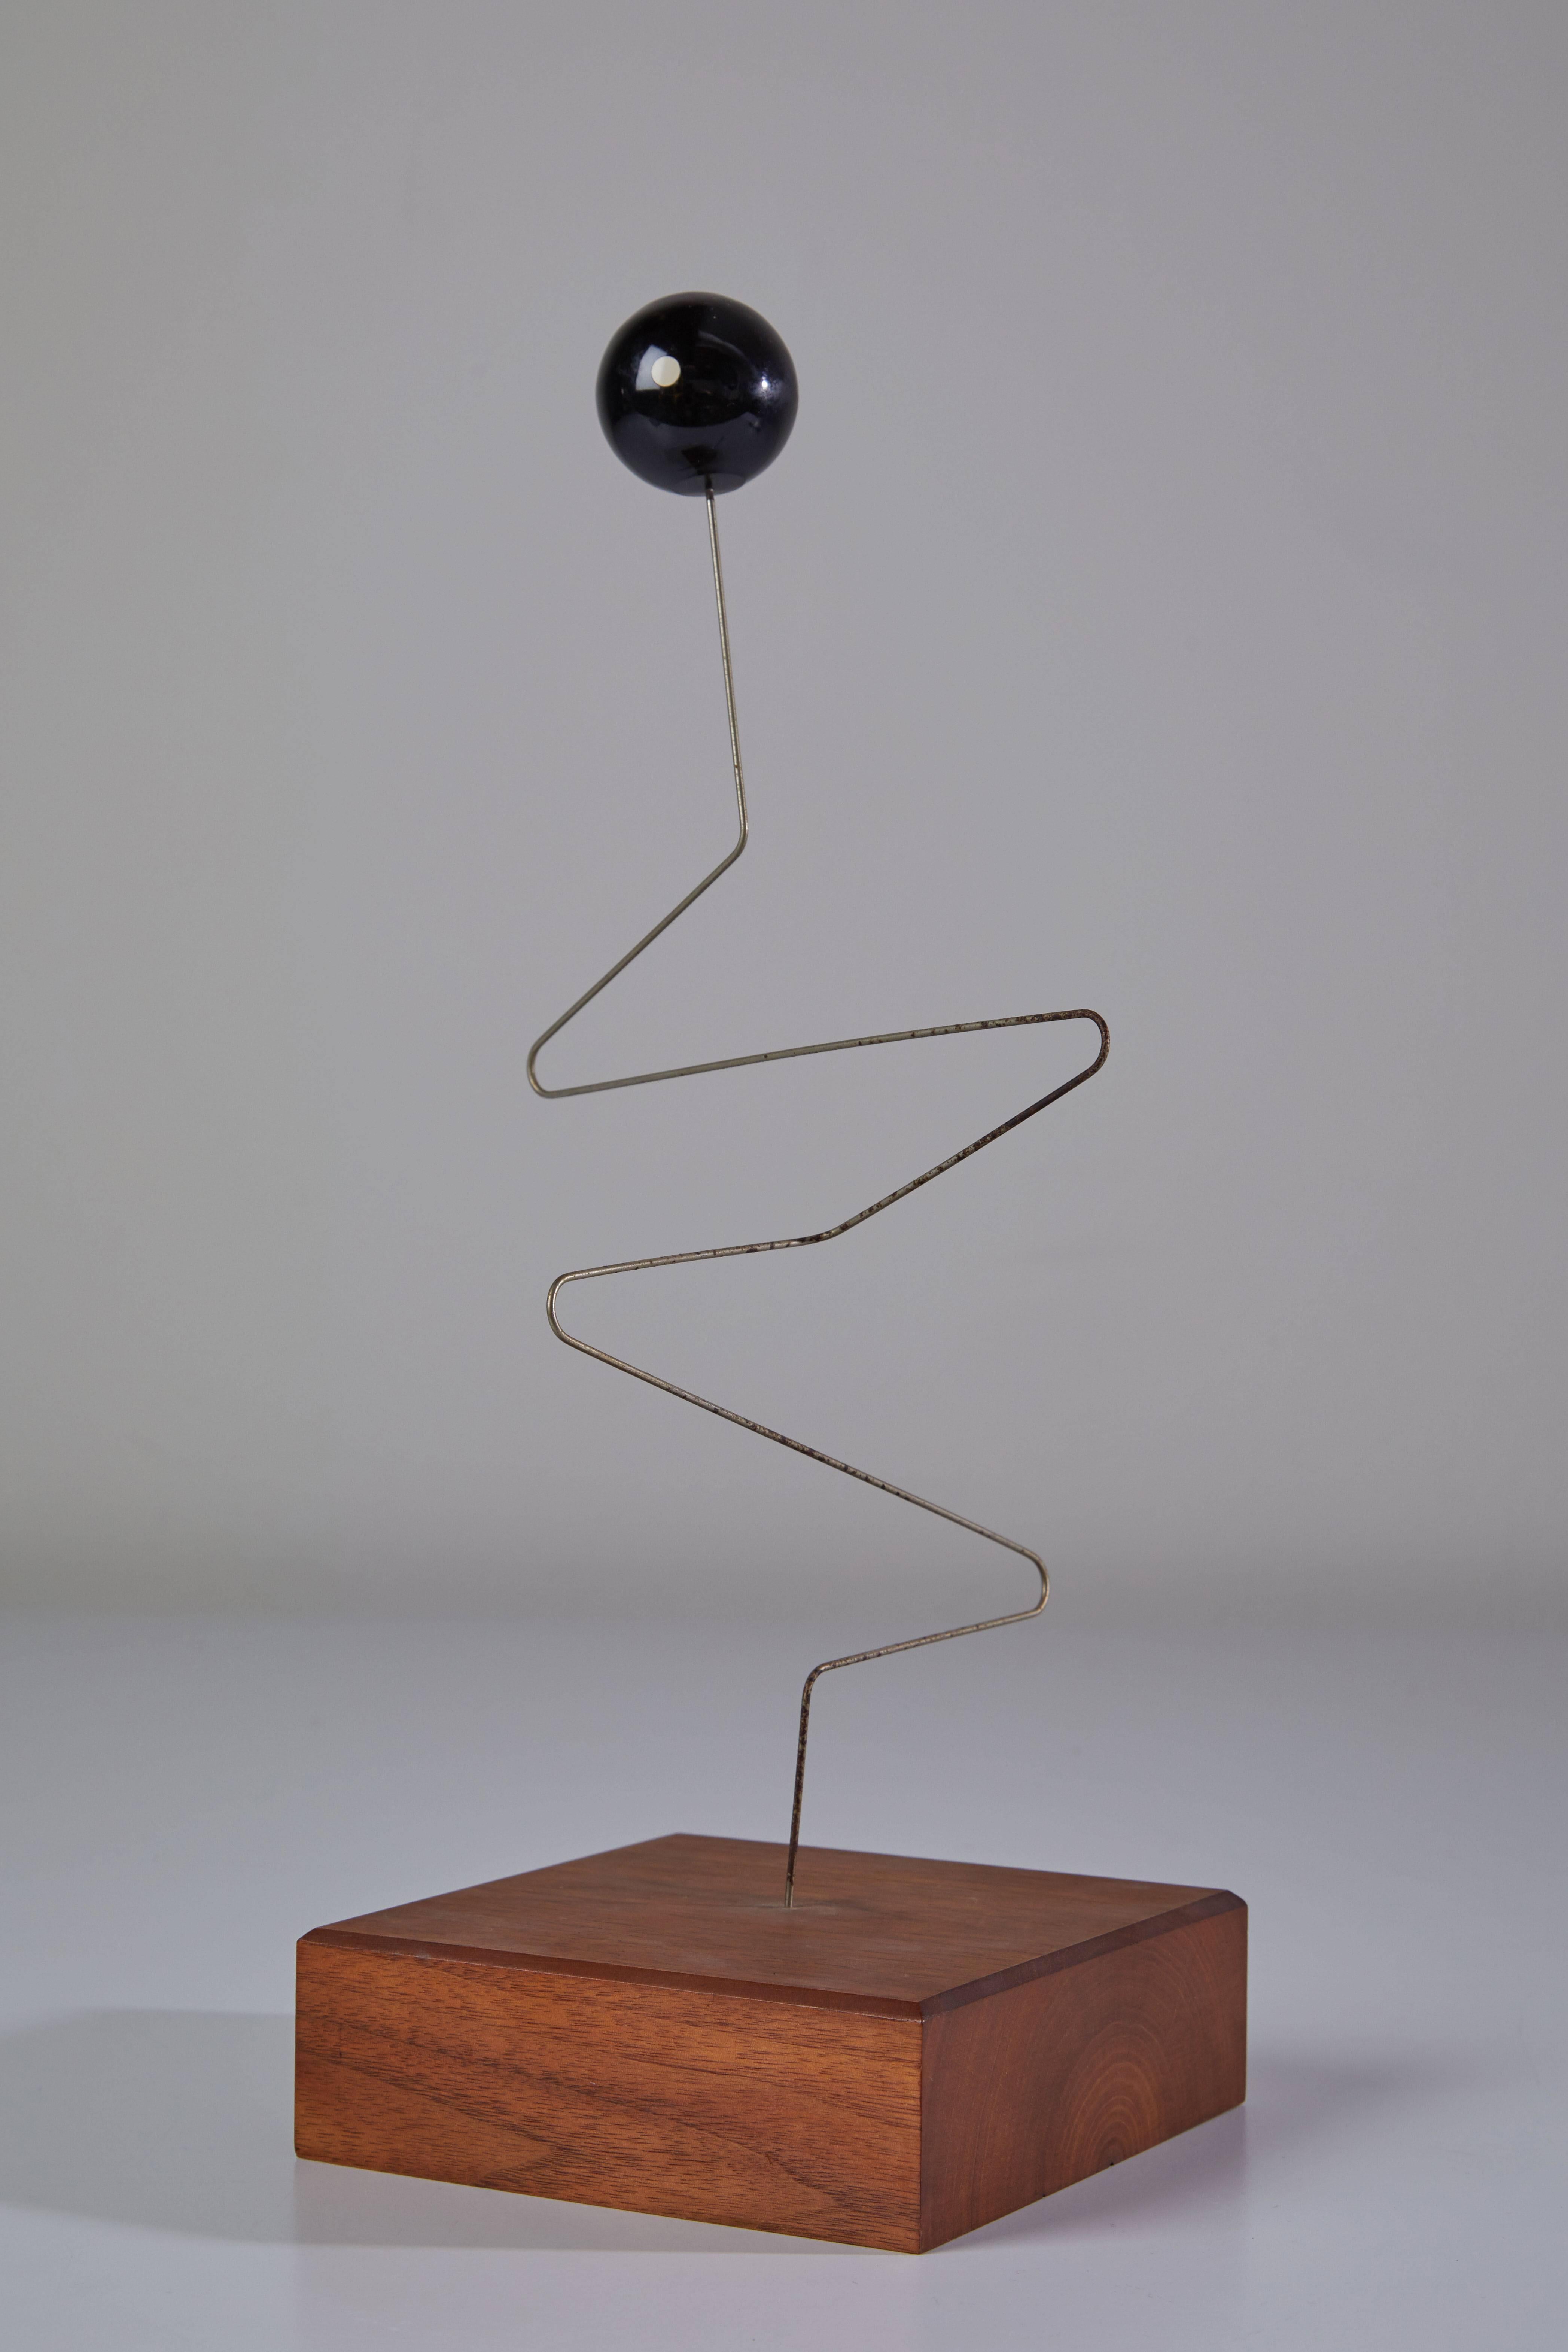 Modernist Kinetic sculpture with wood base. Made in USA, circa 1950s.